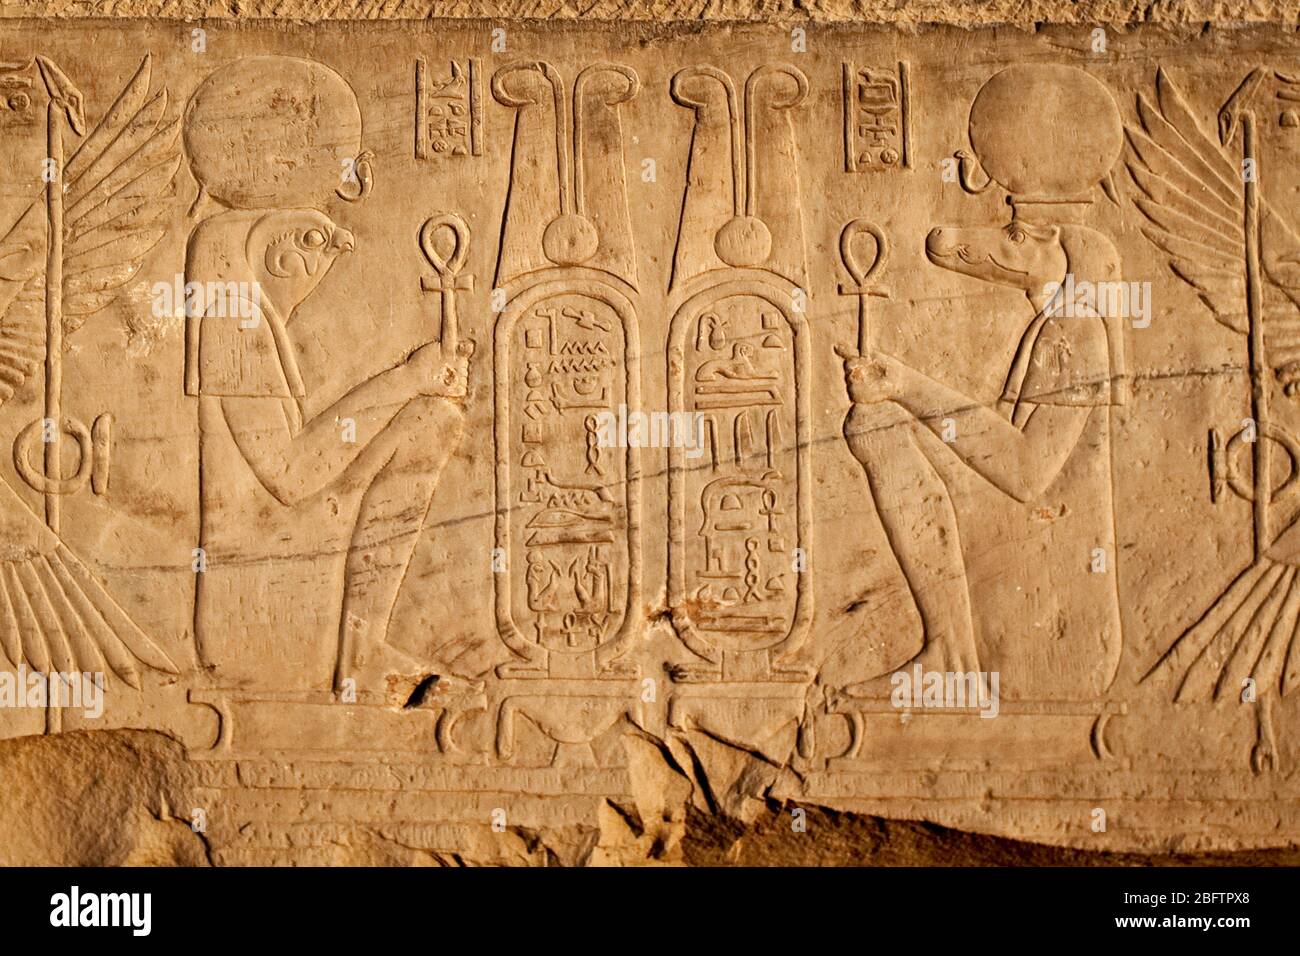 Bas Relief Carvings on a wall in the Kom Ombo Temple in Aswan, Upper Egypt. Stock Photo